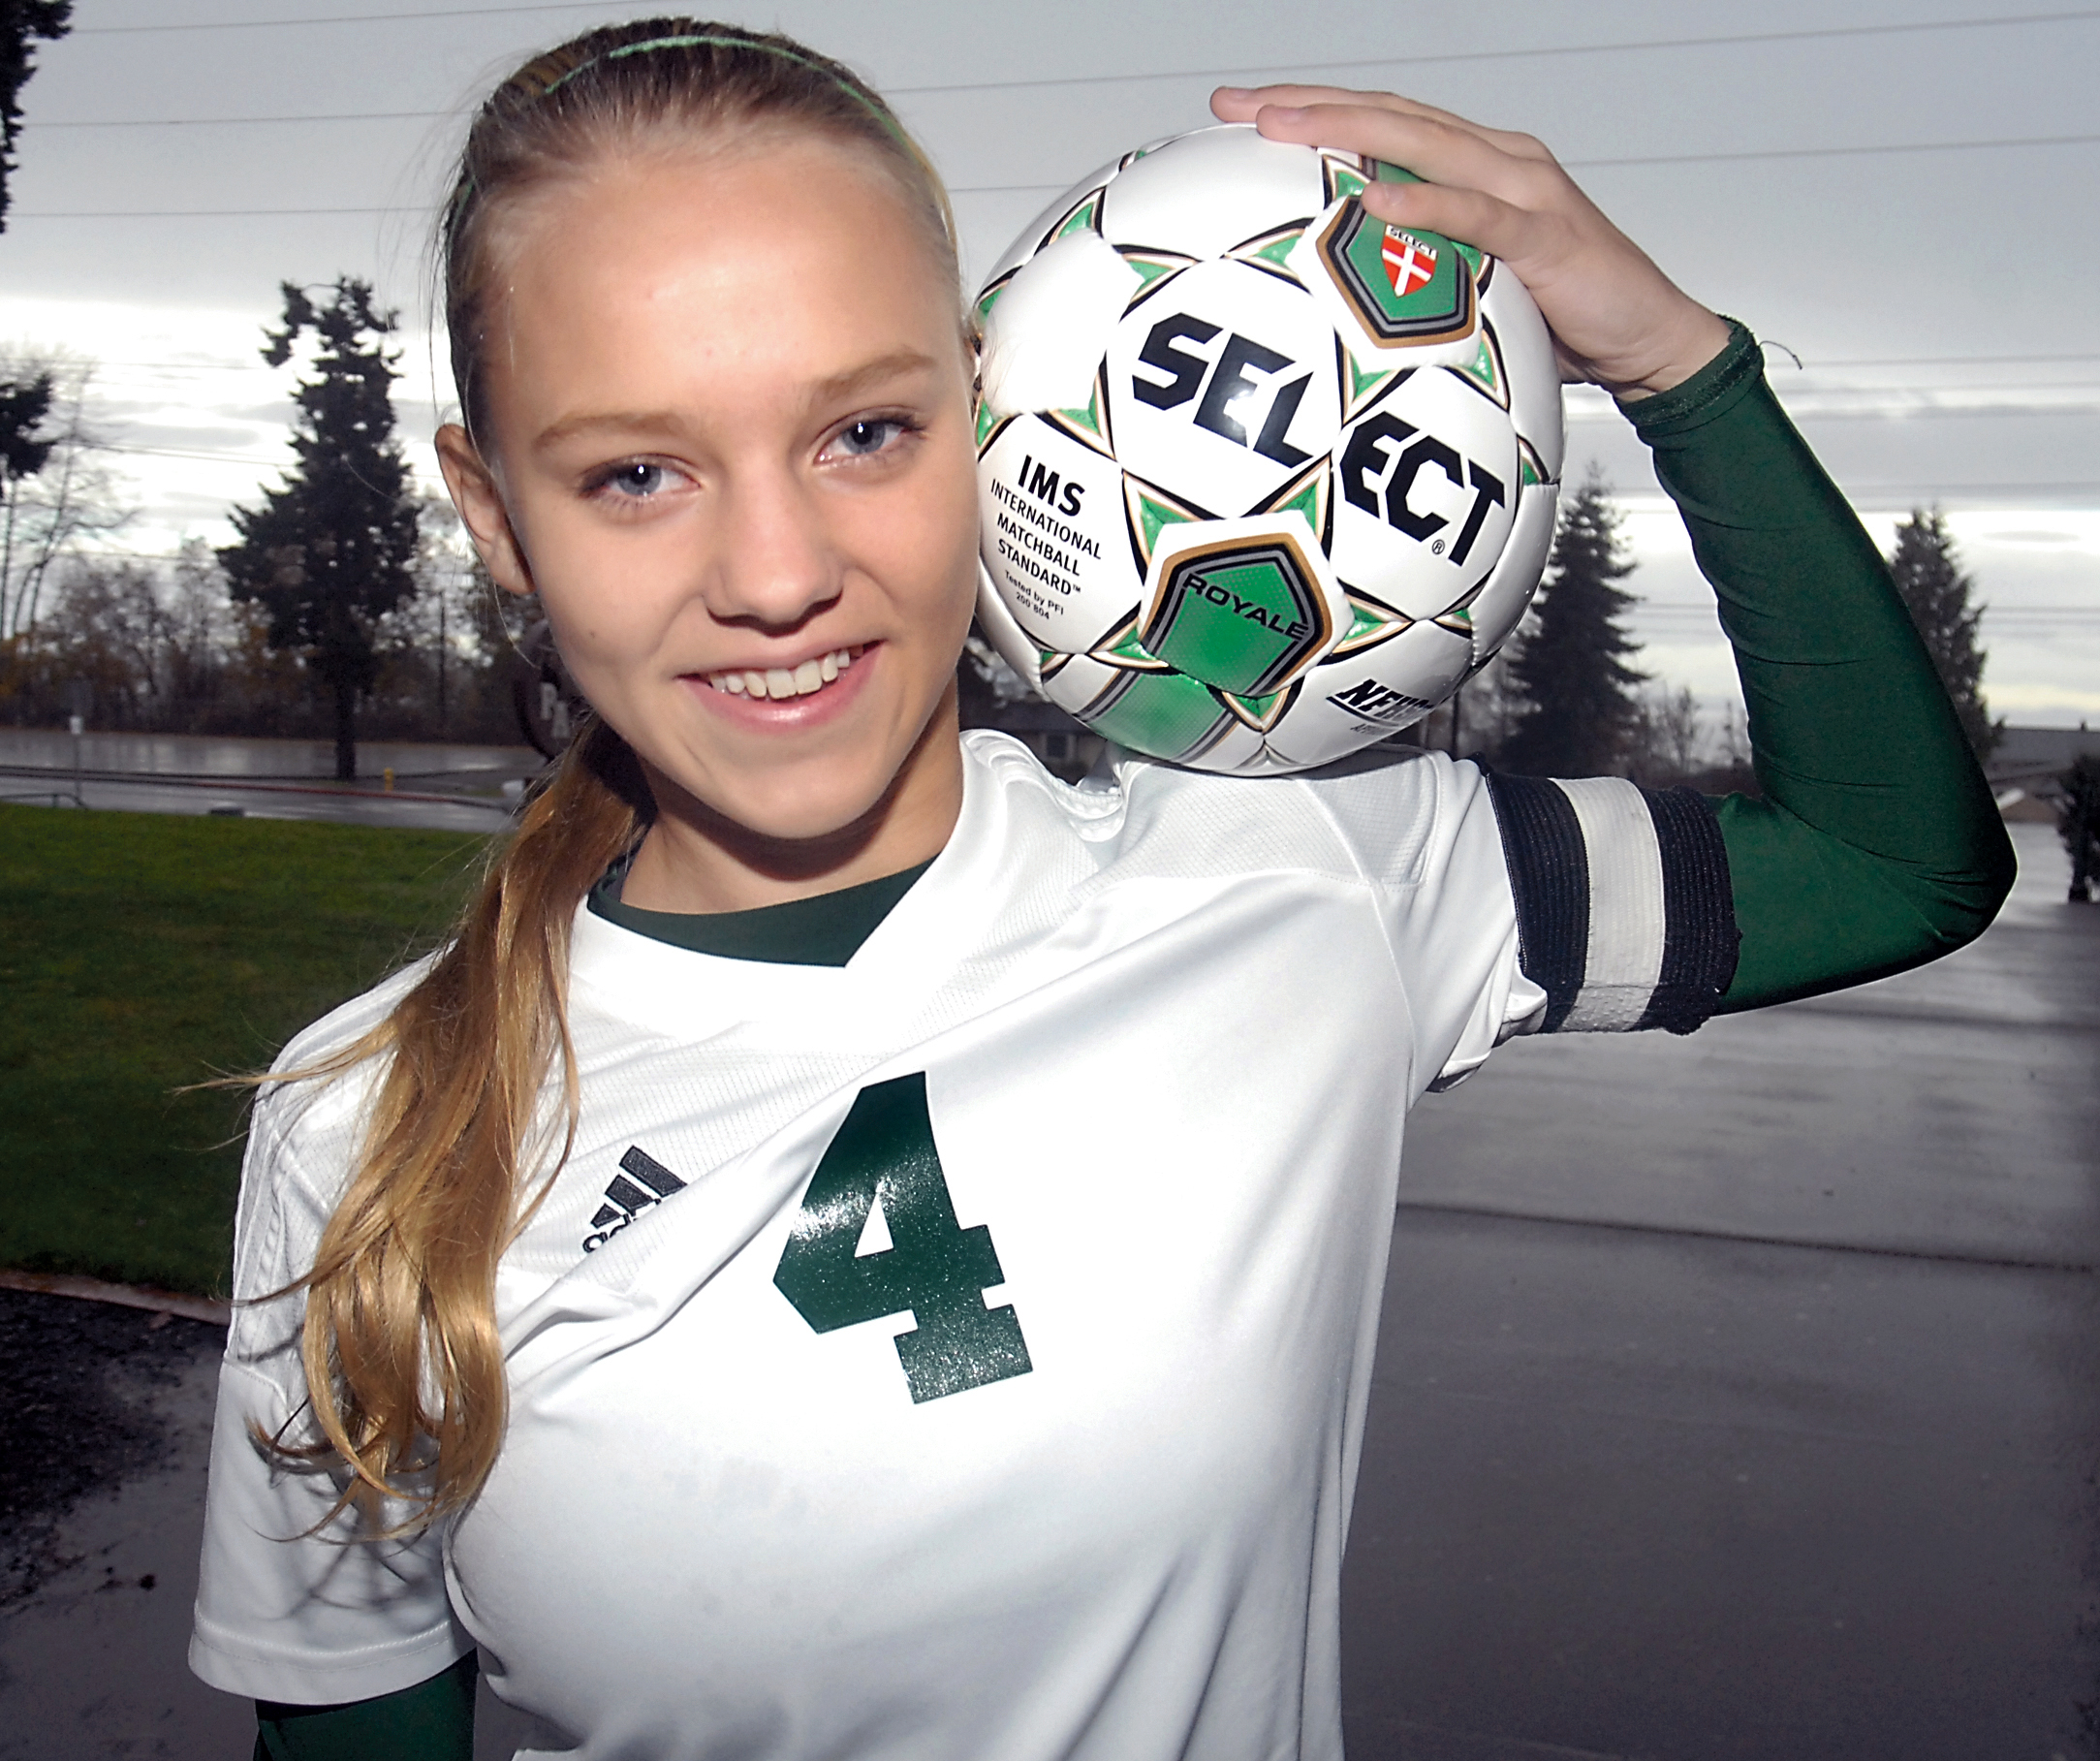 Port Angeles junior Maddie Boe was selected as All-Peninsula girls soccer MVP  by a poll of area coaches and Peninsula Daily News sports staff. Keith Thorpe/for Peninsula Daily News